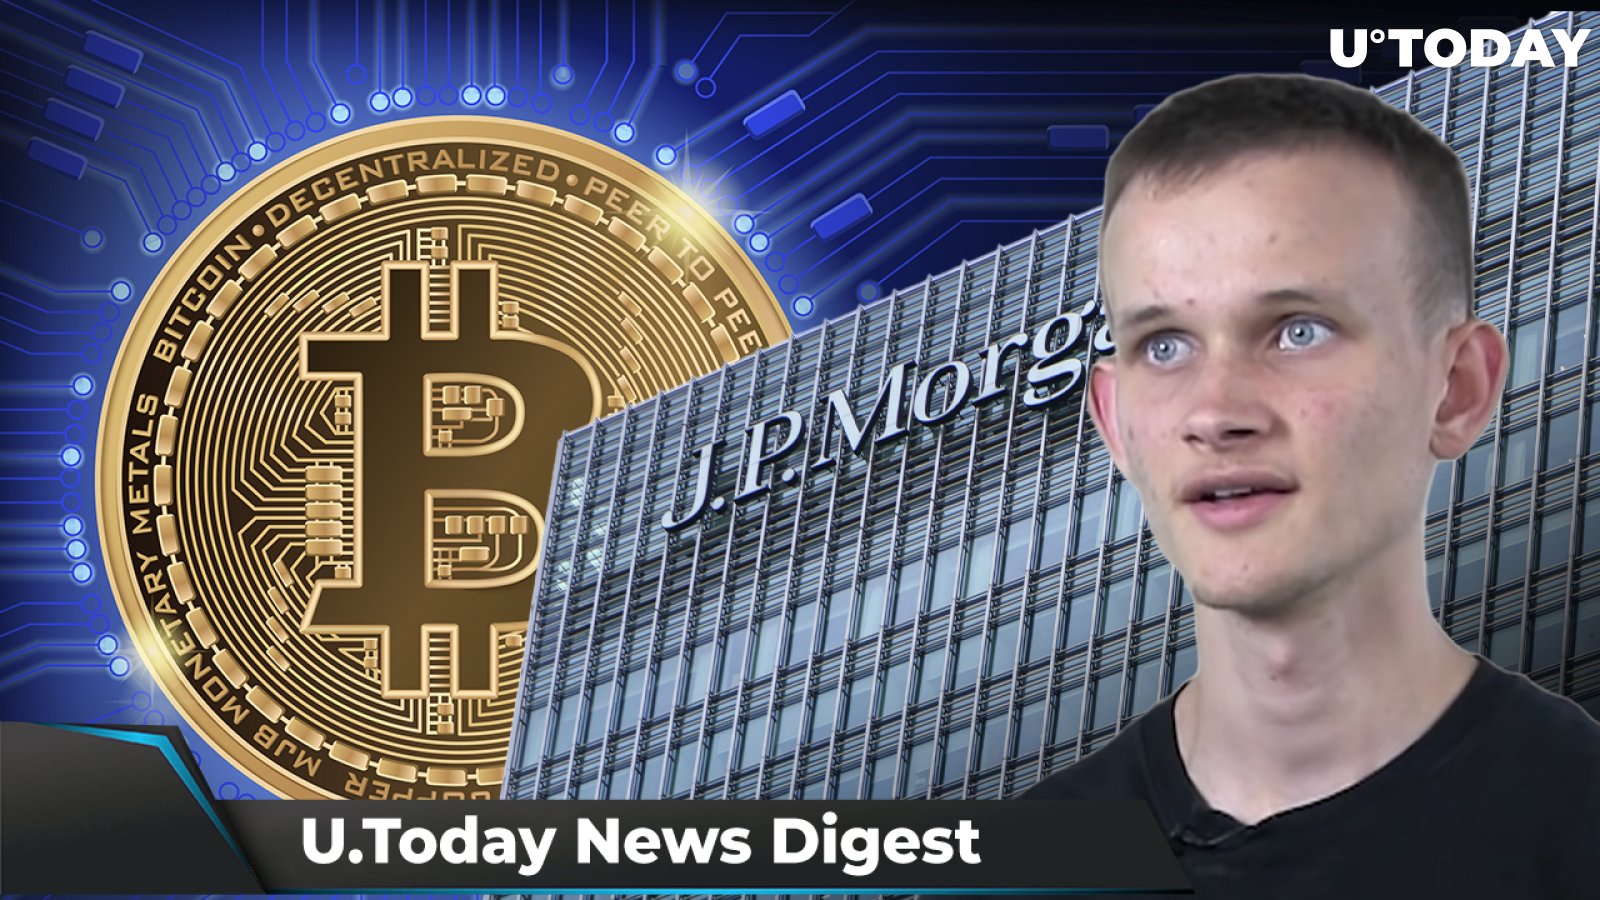 Bitcoin Tanks to $42K for 3 Reasons, JPMorgan Has Bearish Warning About ETH, Buterin Suggests New Fee Structure for ETH: Crypto News Digest by U.Today